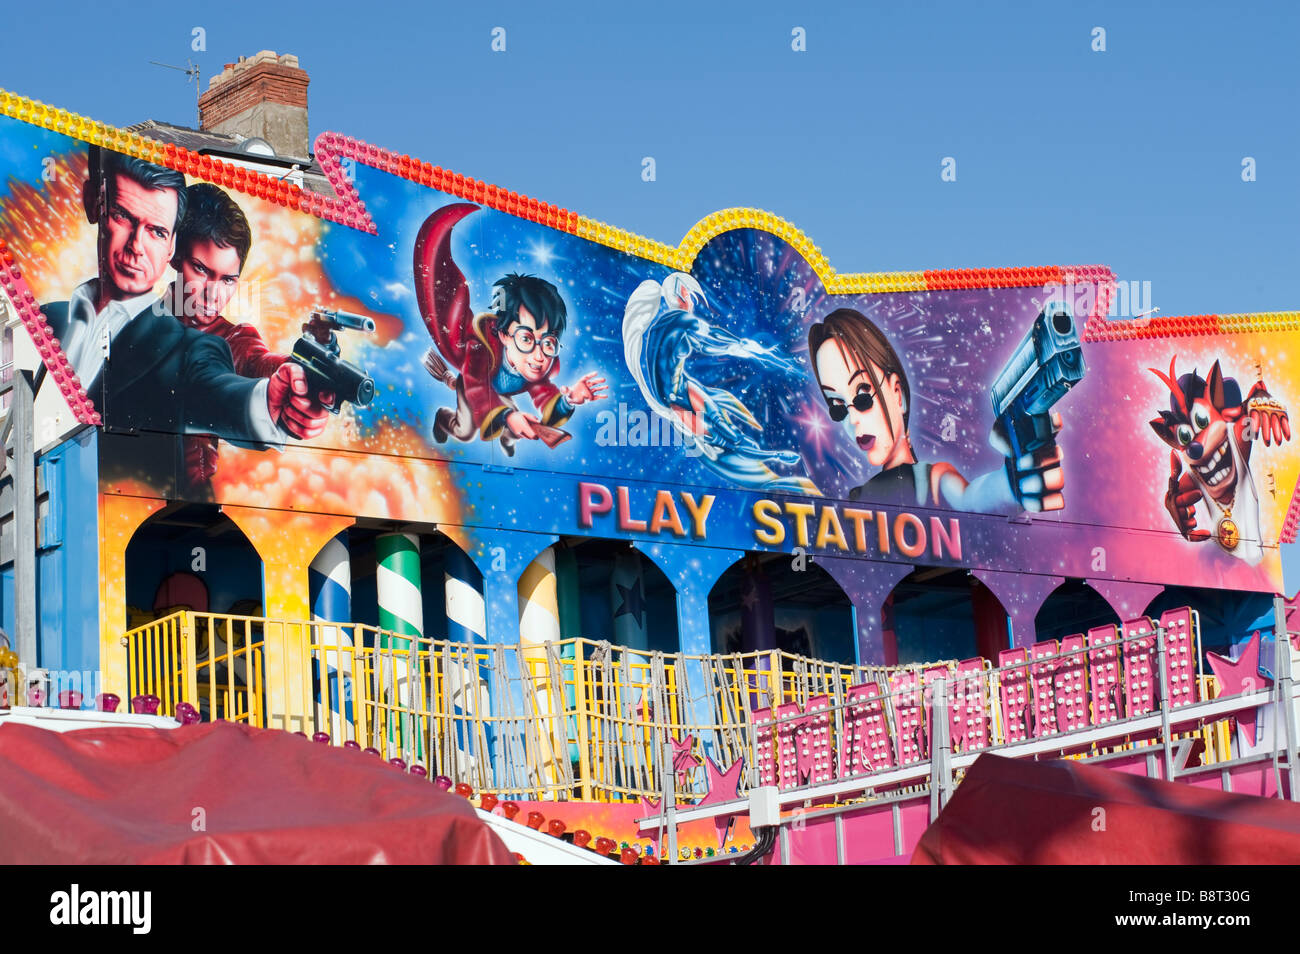 Fairground ride colorful frontage Stock Photo